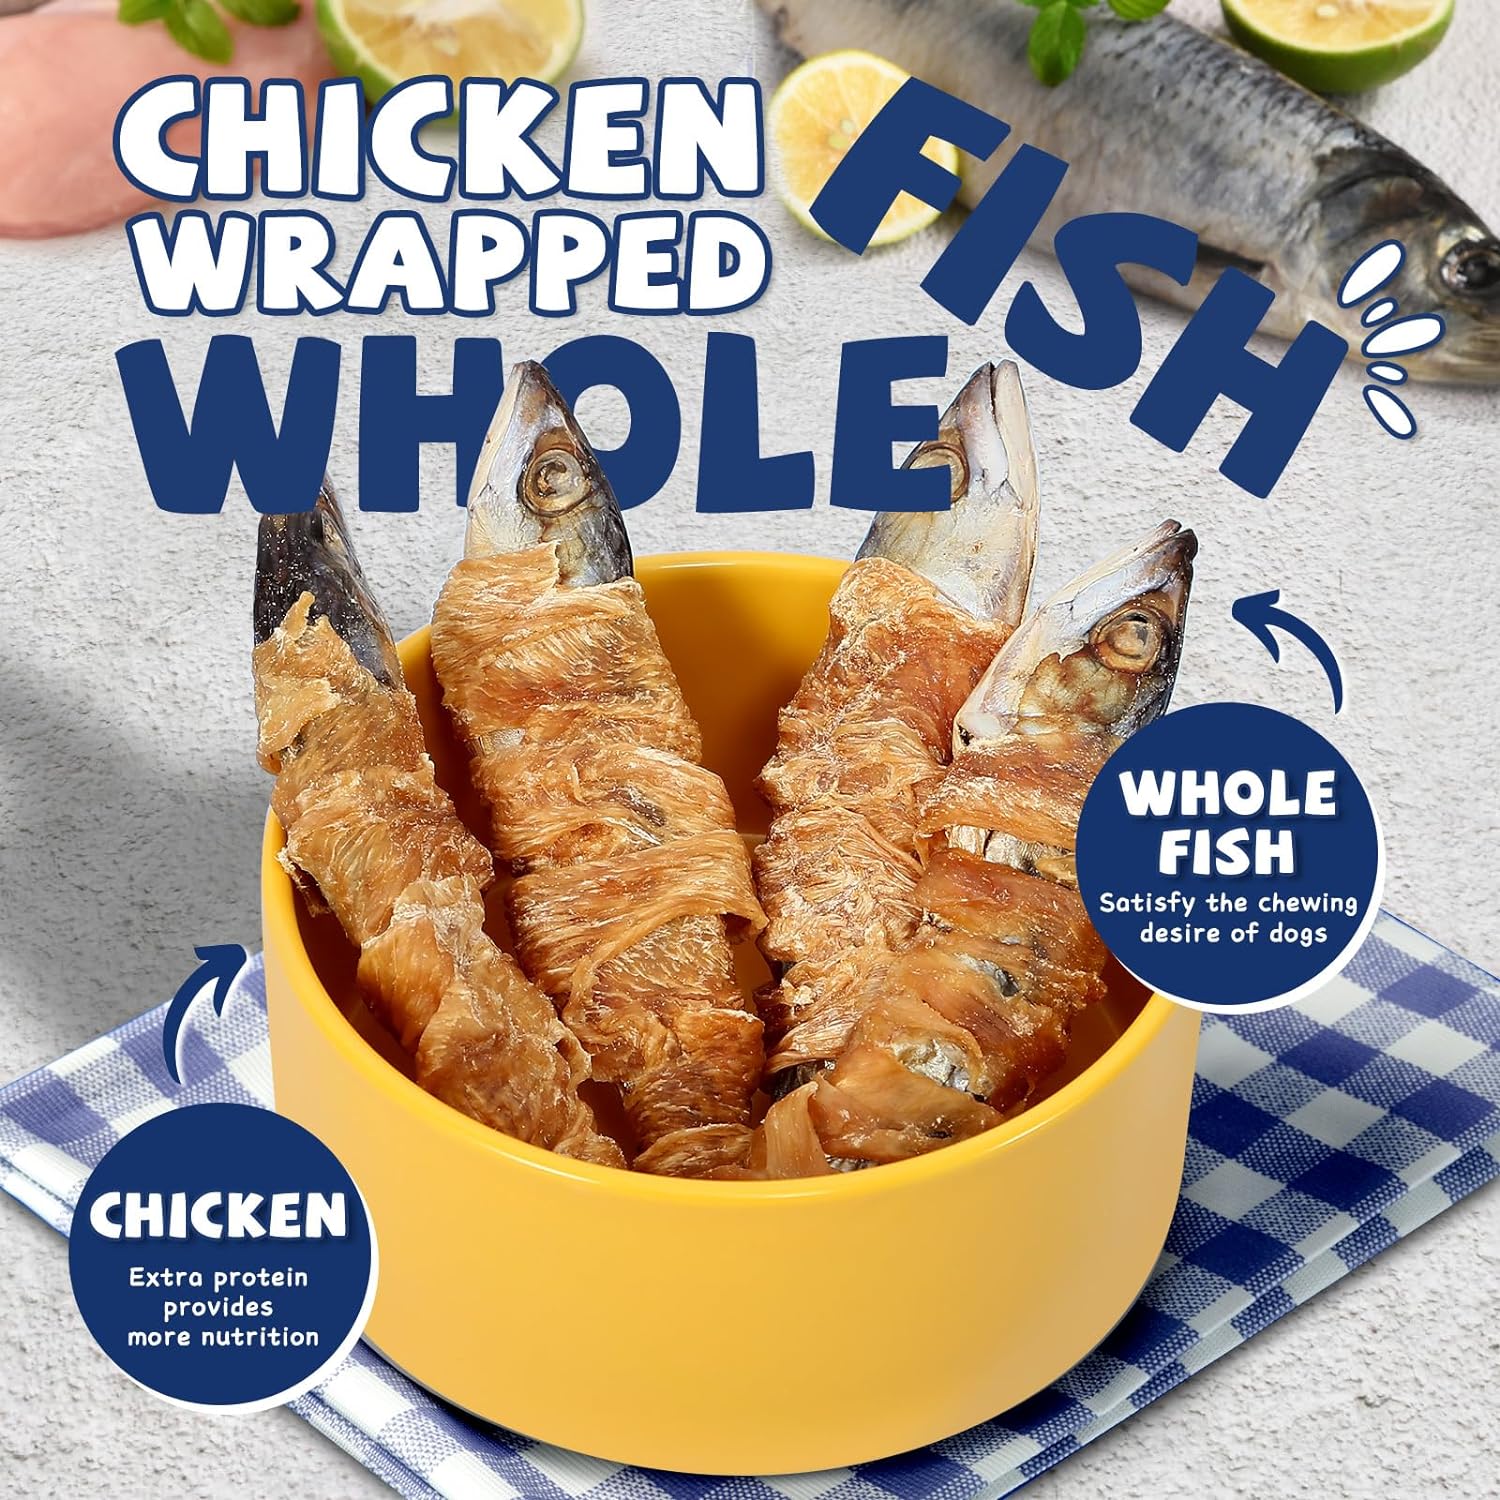 PAWUP Chicken Wrapped Whole Fish, 4Pcs per Pack, 5.3oz